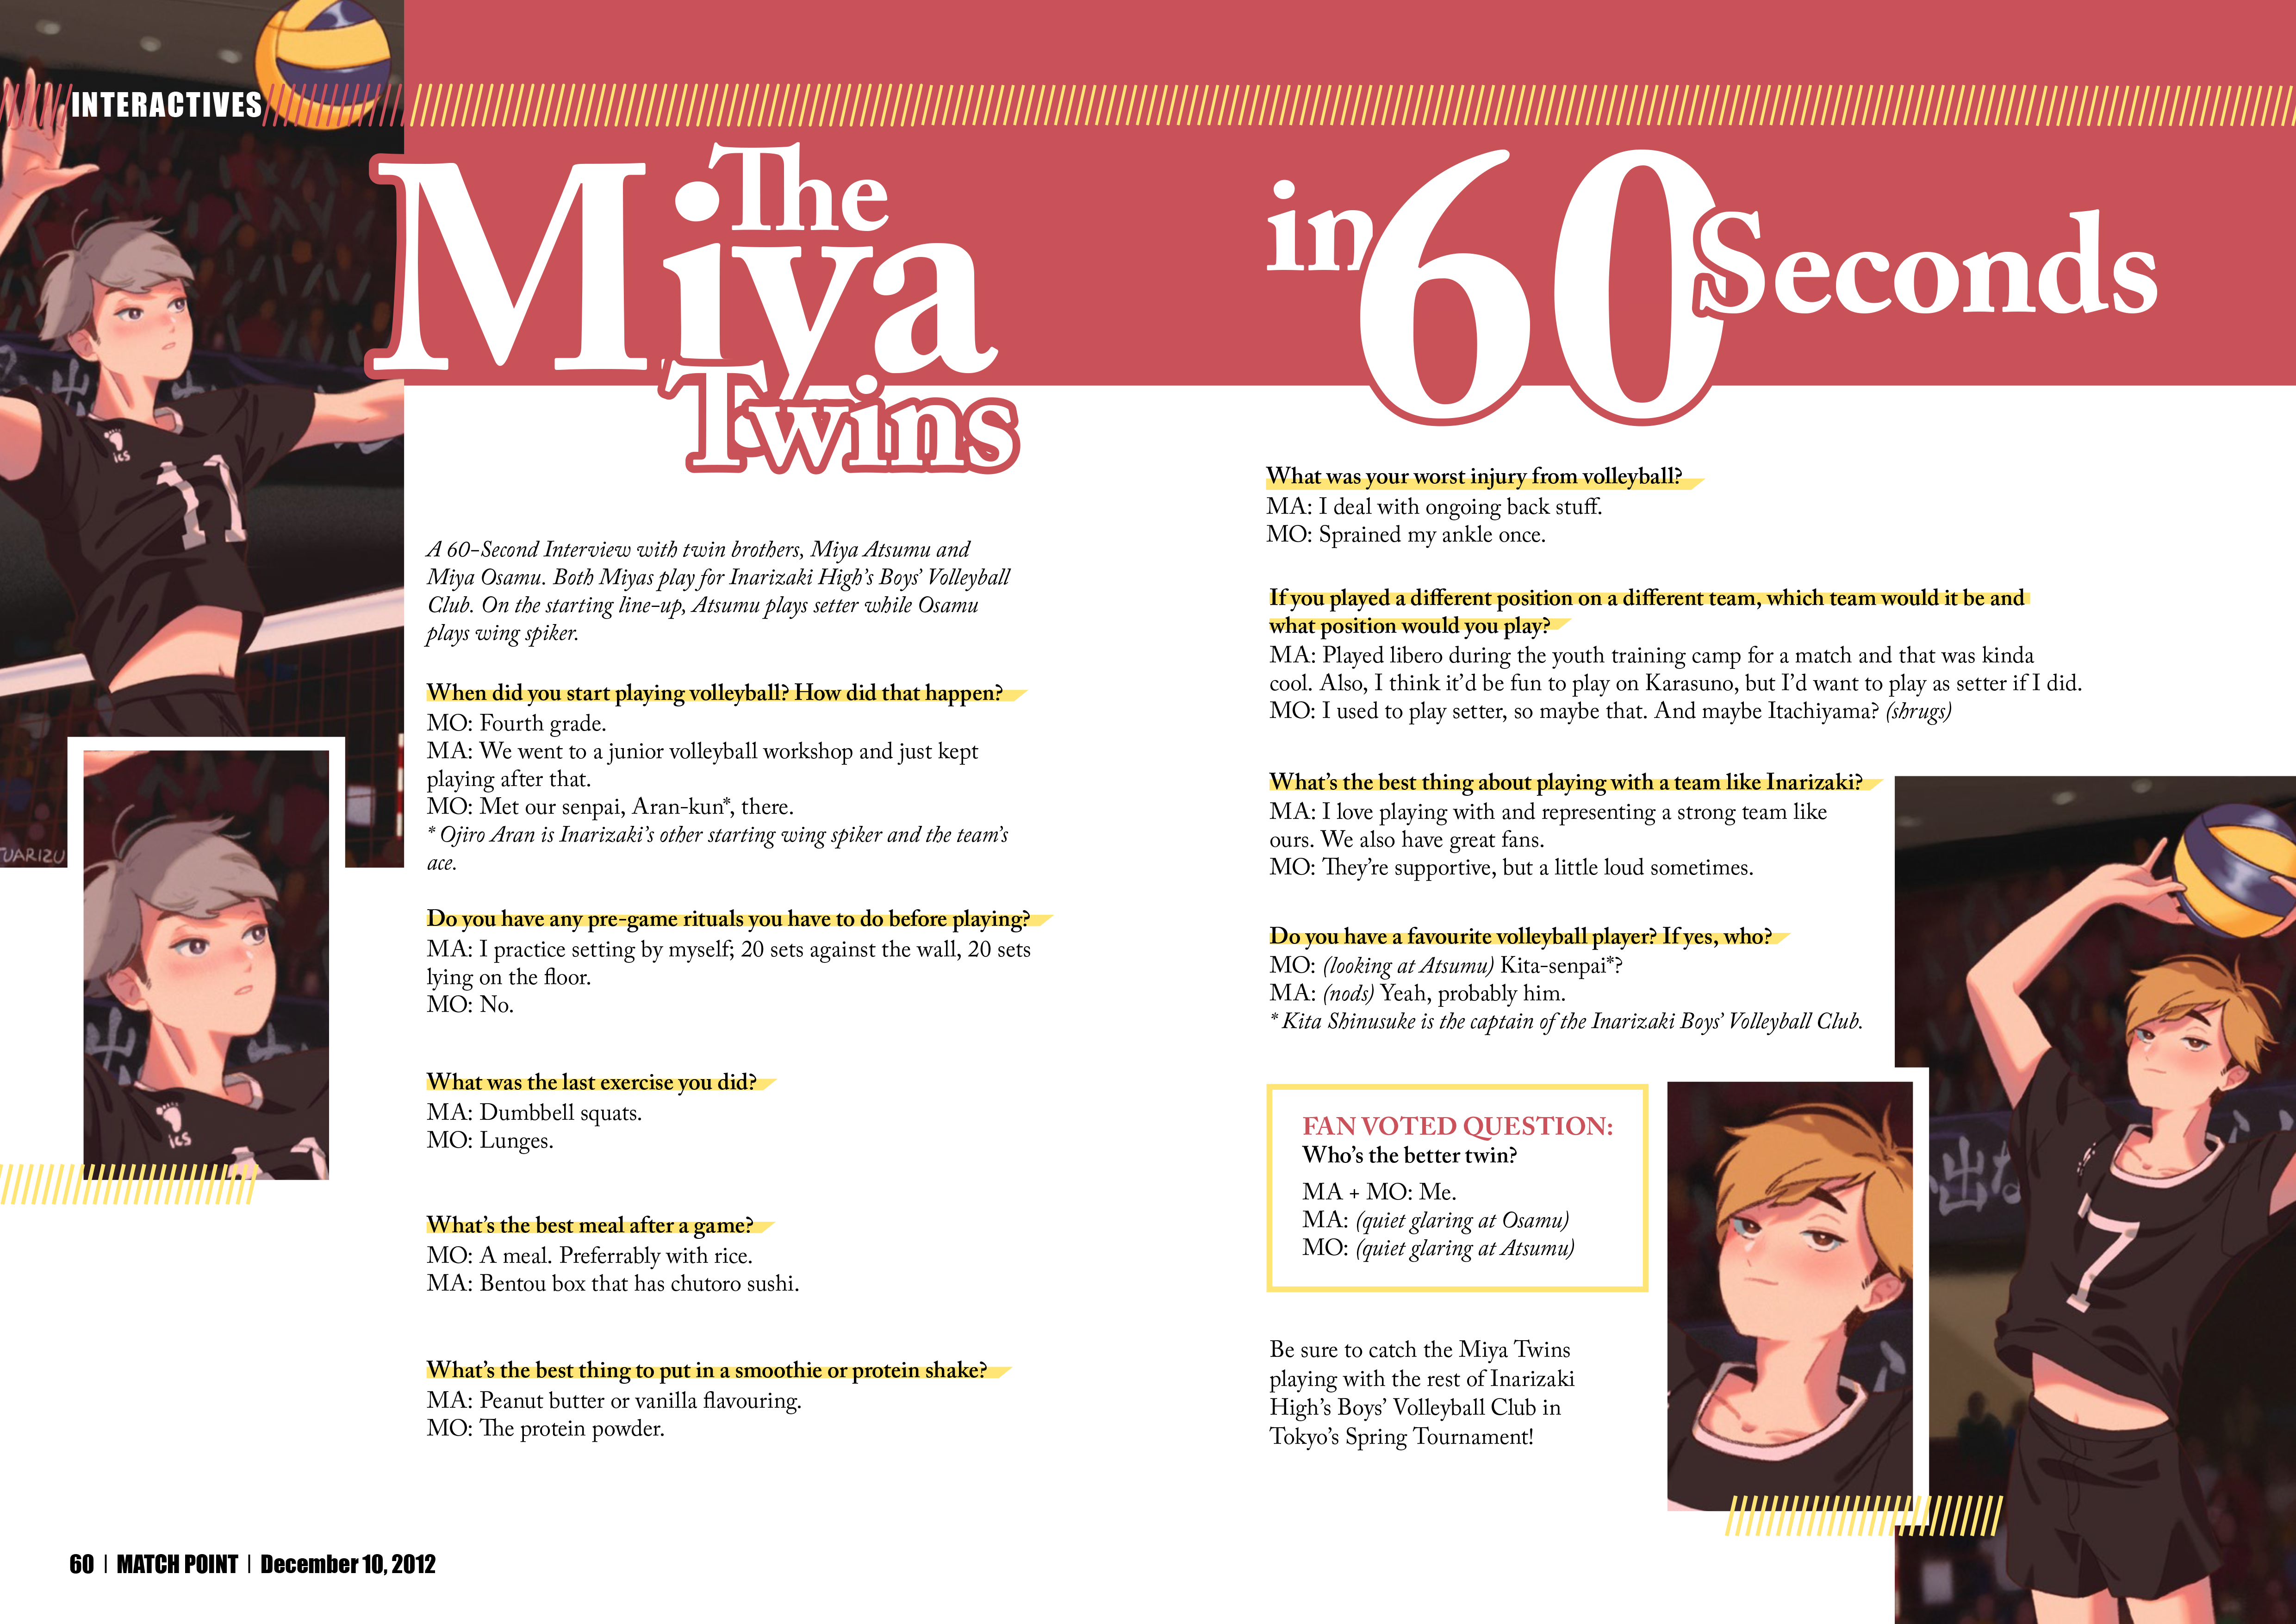 A screenshot of the interview's spread in the digital magazine.